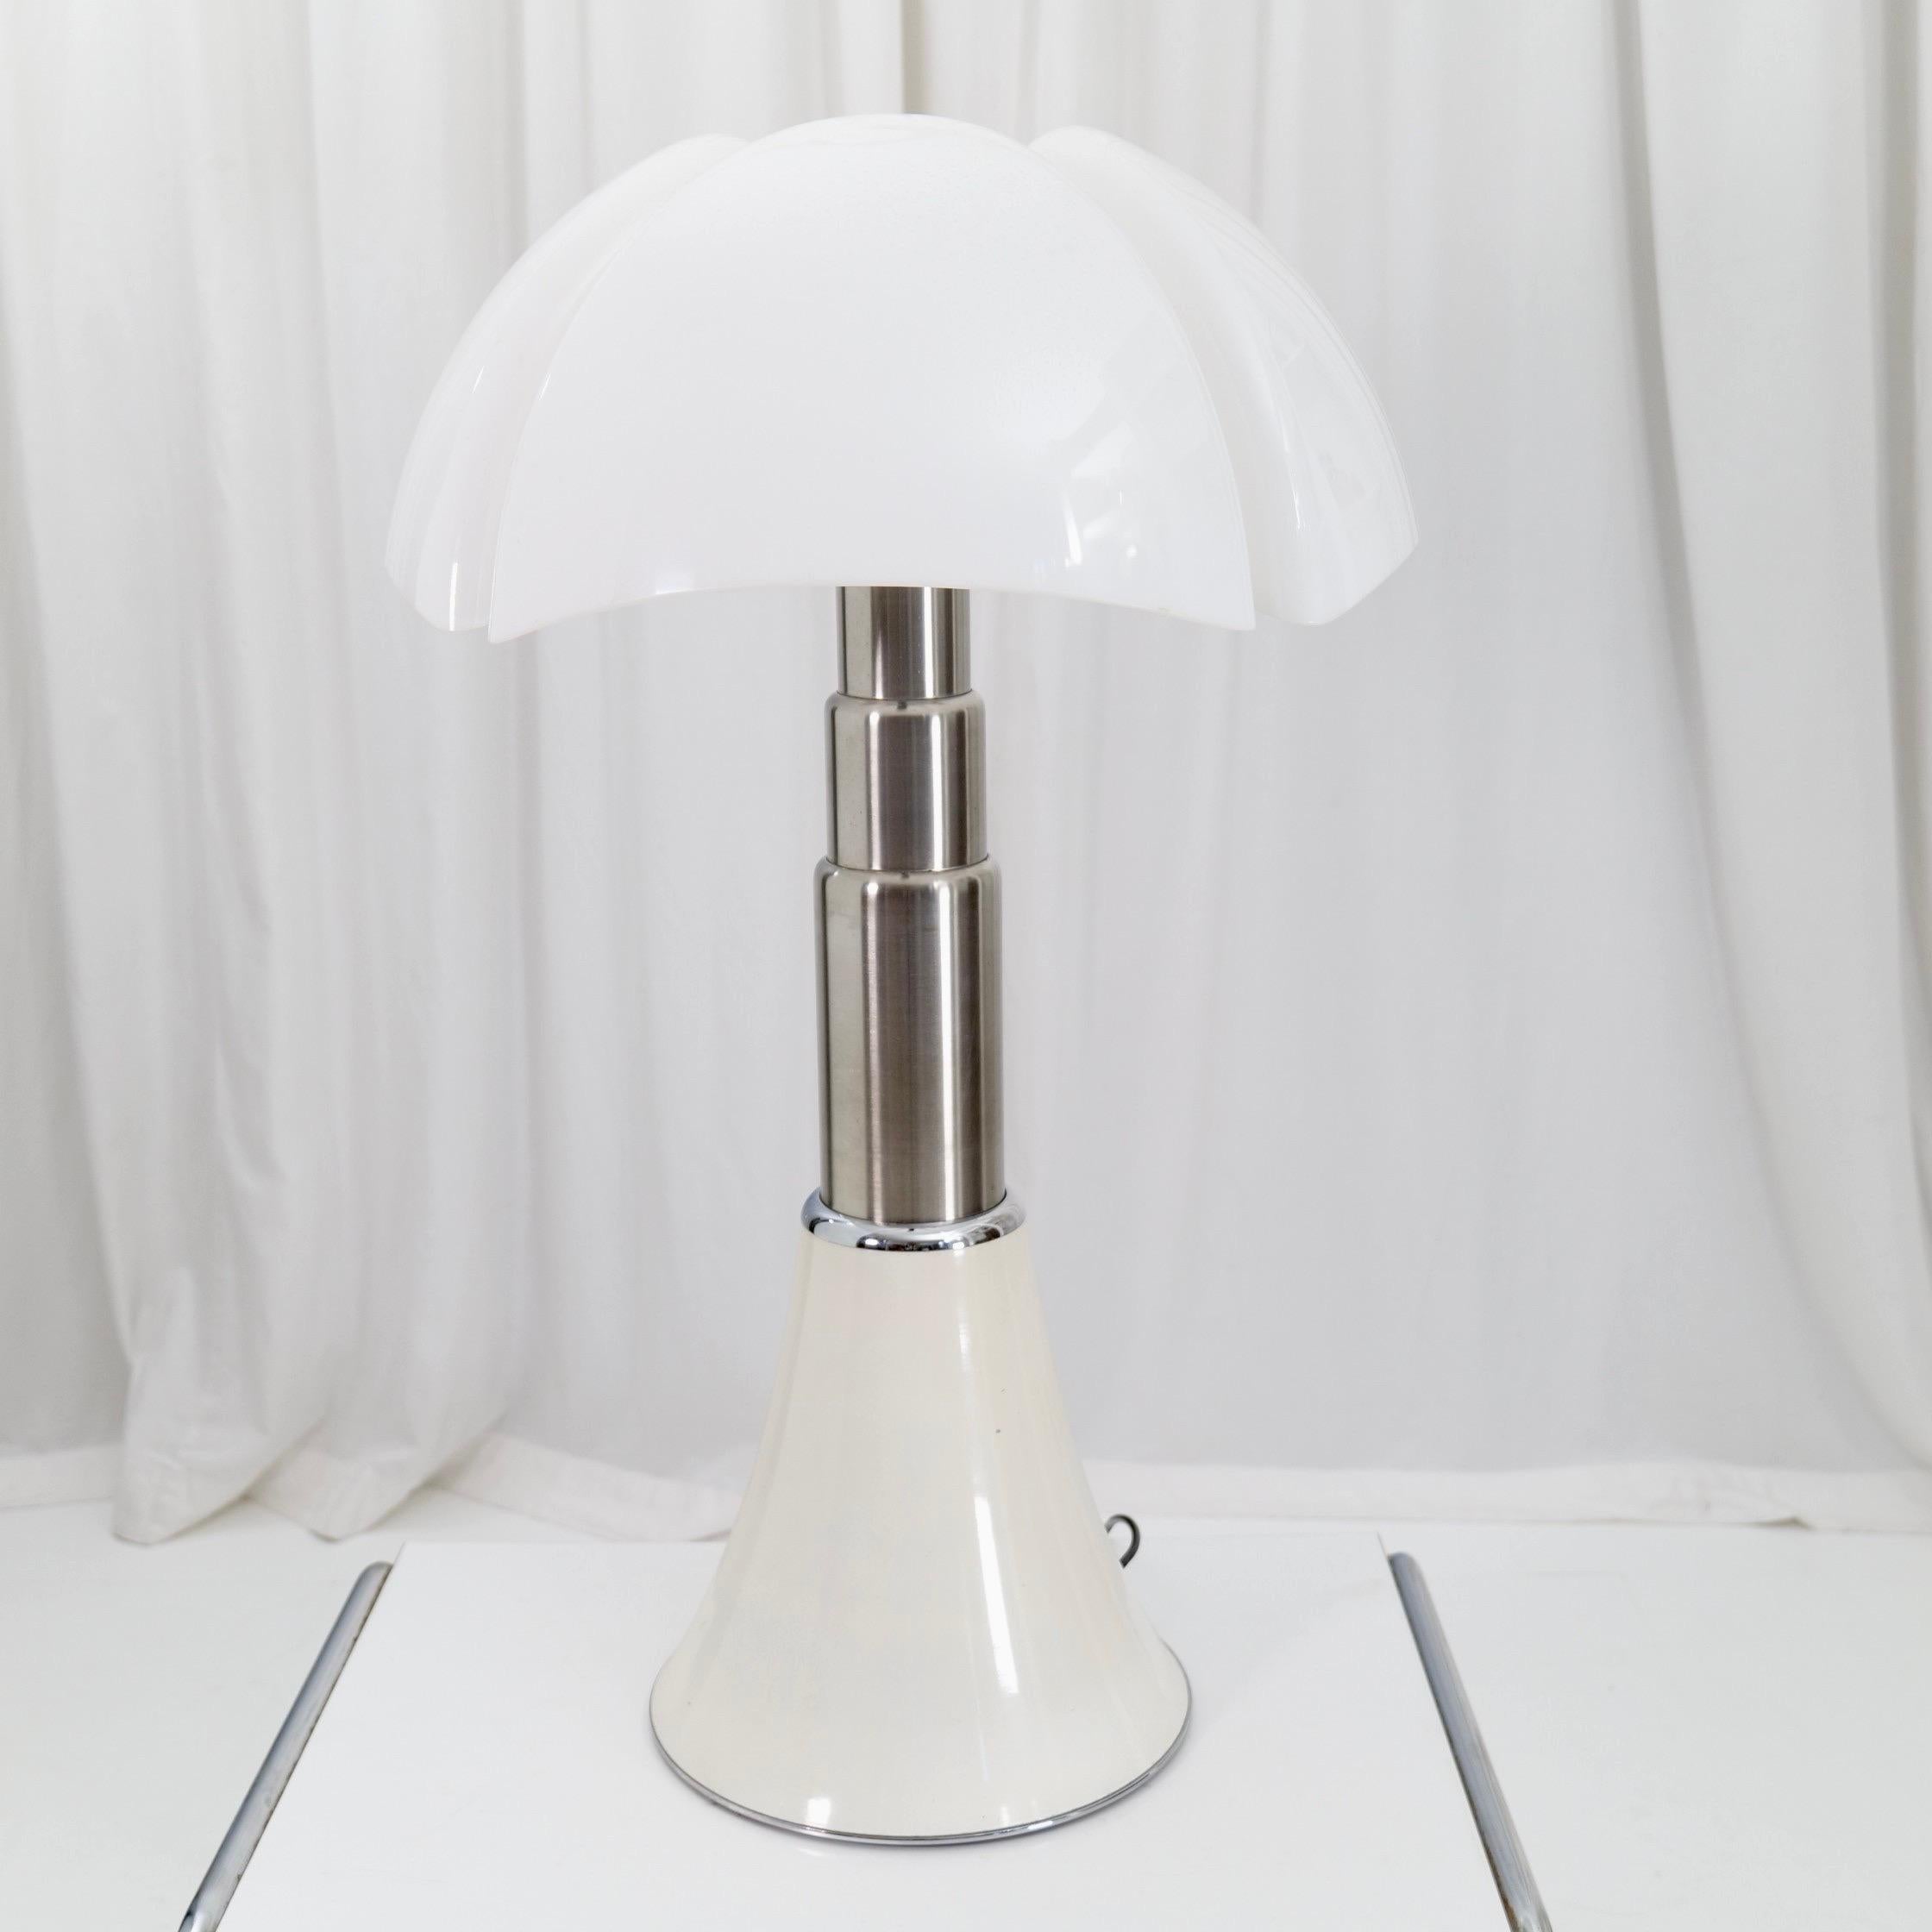 Early Vintage Pipistrello Lamp by Gae Aulenti for Martinelli Luce 1